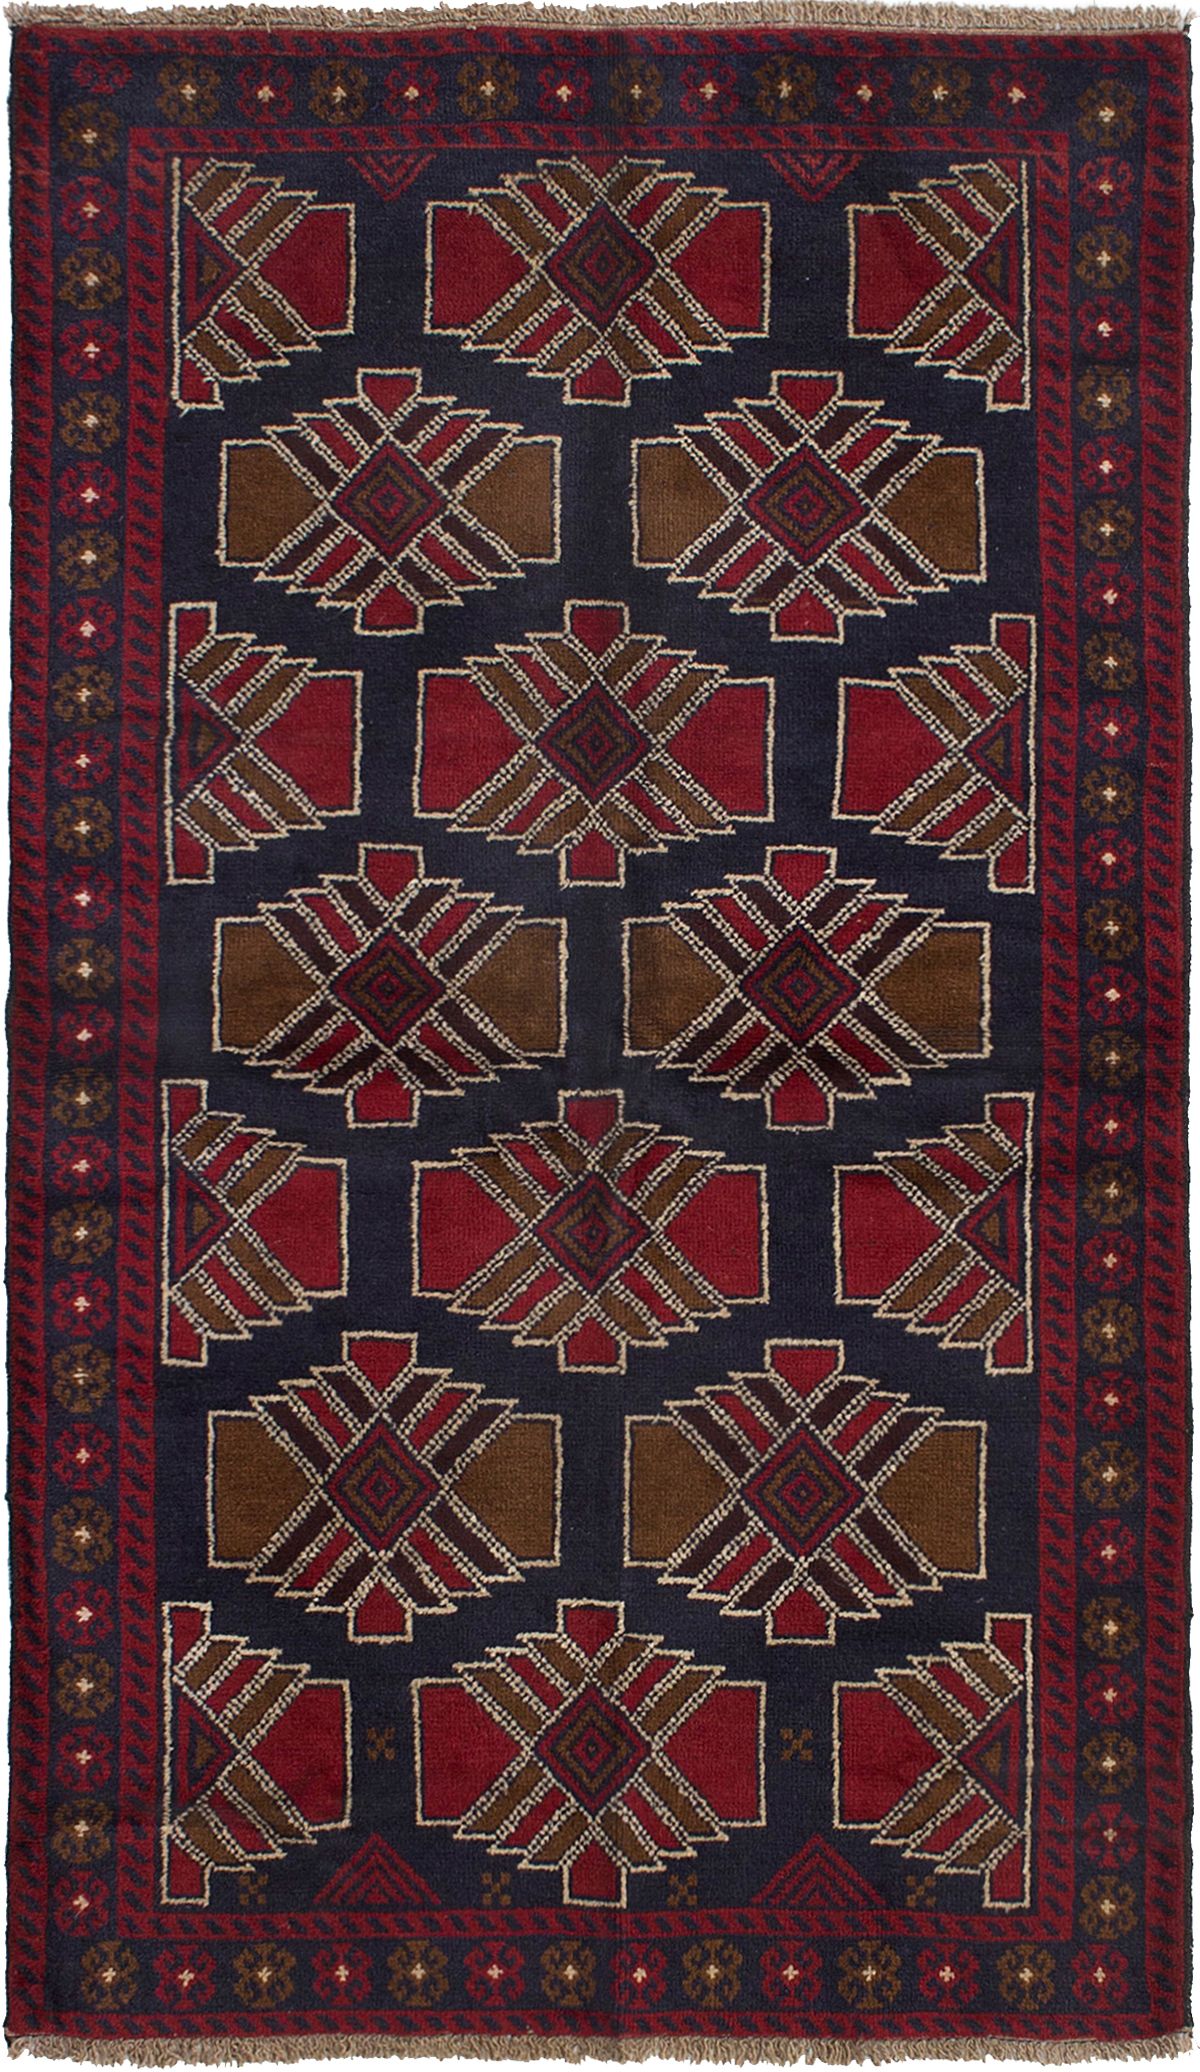 Hand-knotted Teimani Dark Navy, Red Wool Rug 3'6" x 6'0"  Size: 3'6" x 6'0"  